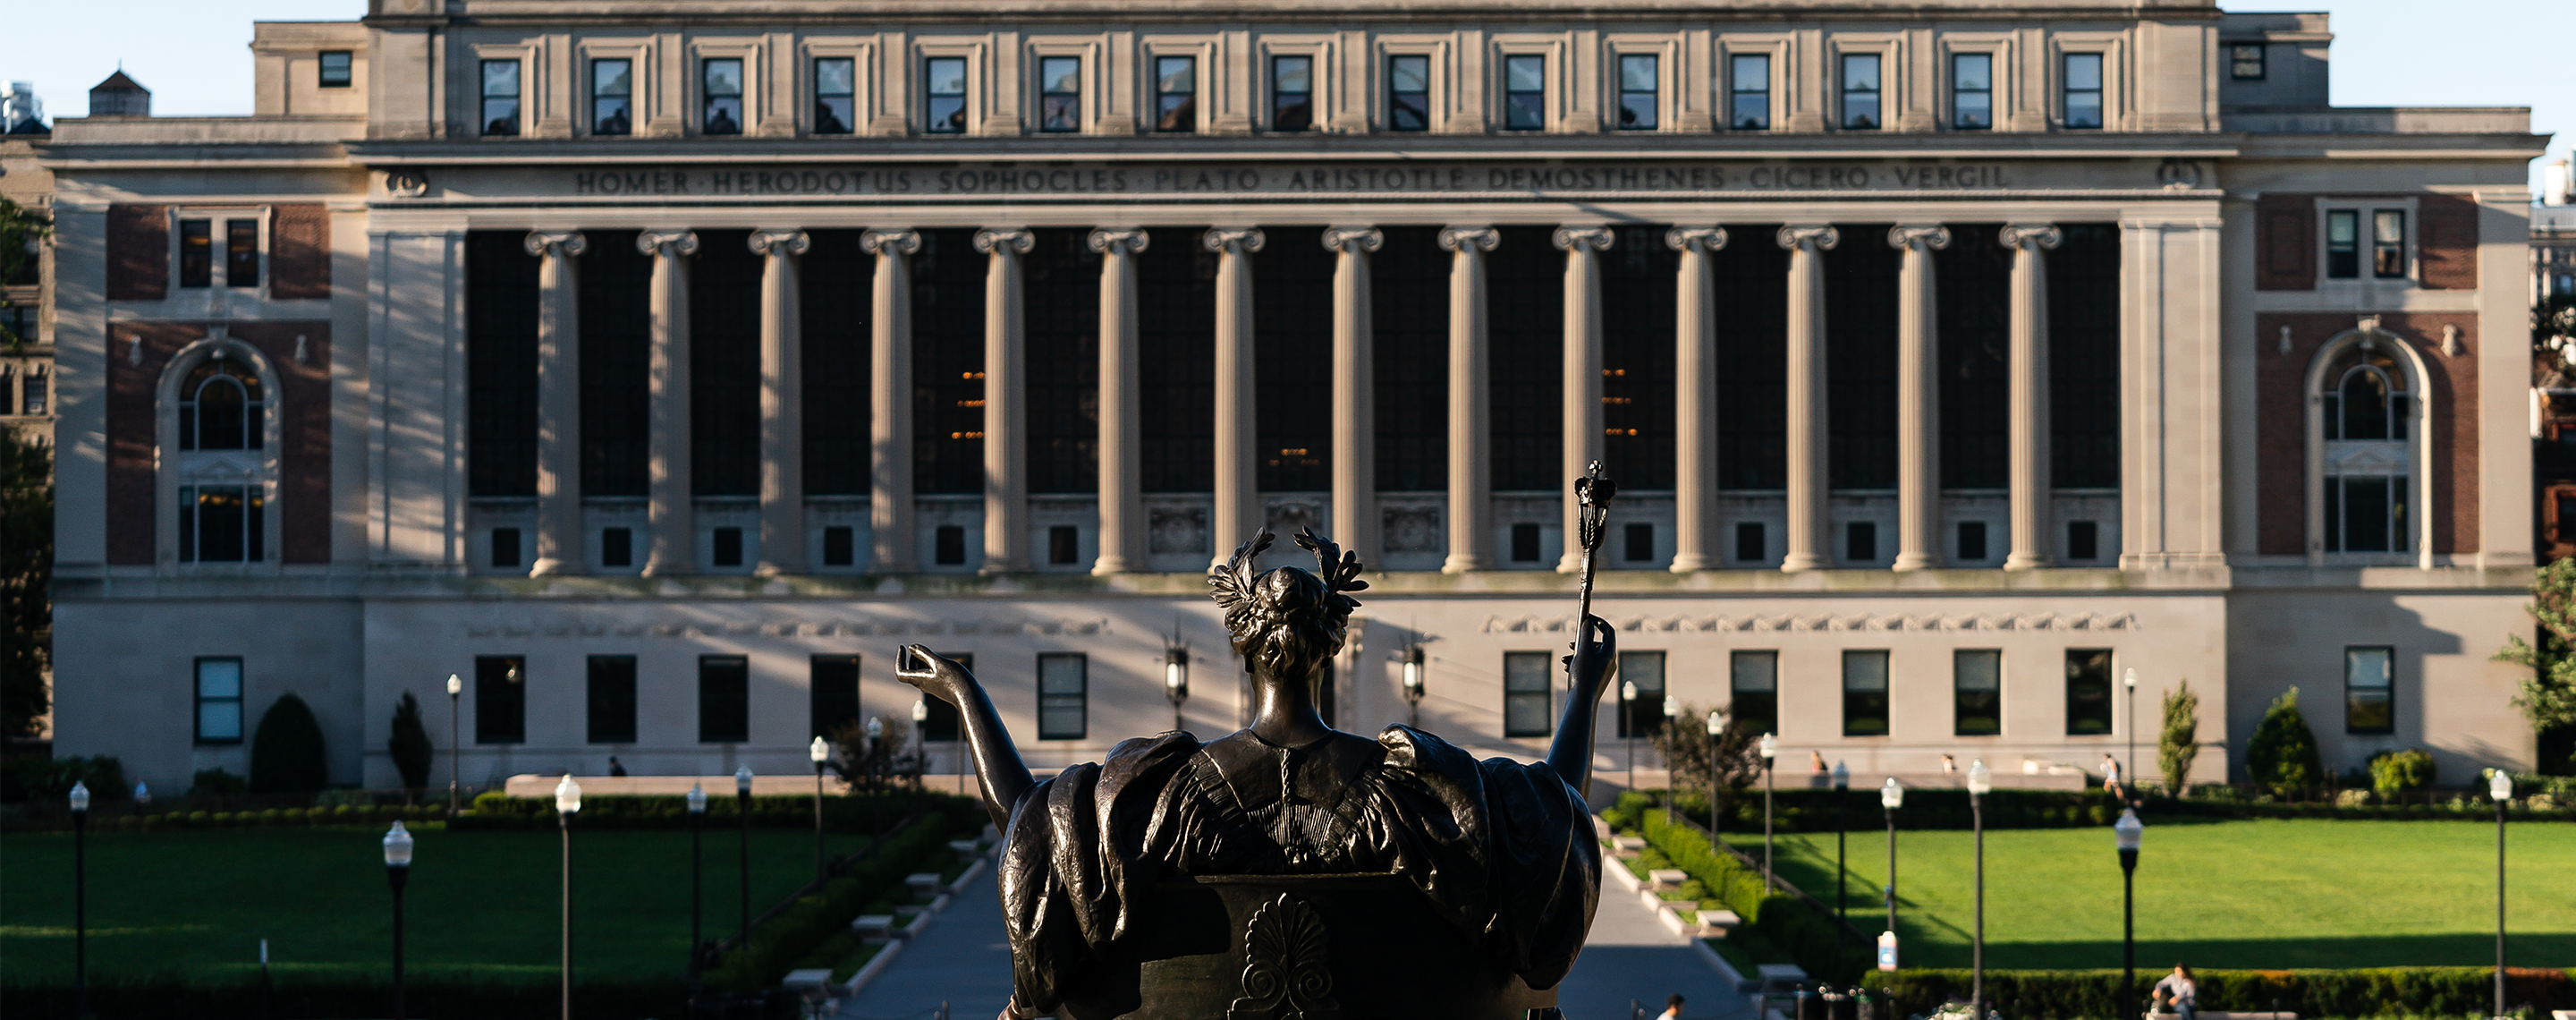 How to Get Into Columbia University: All You Need to Know